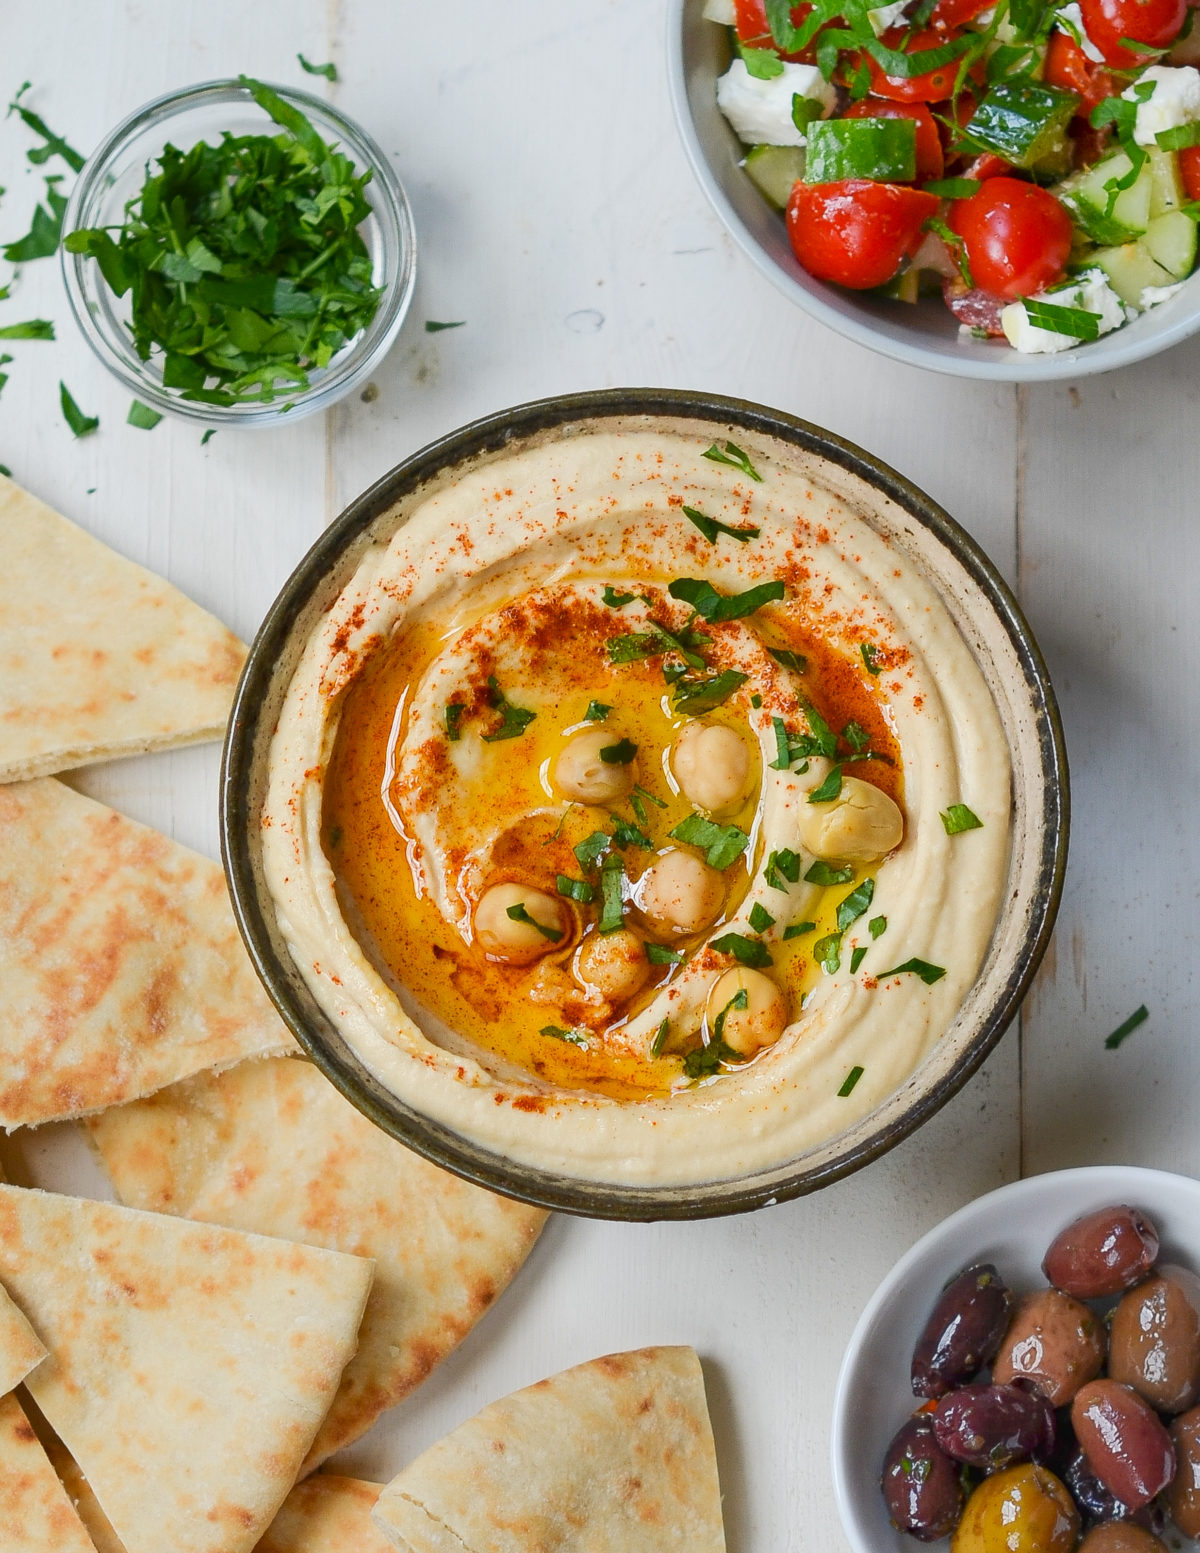 Bowl of hummus topped with whole chickpeas.